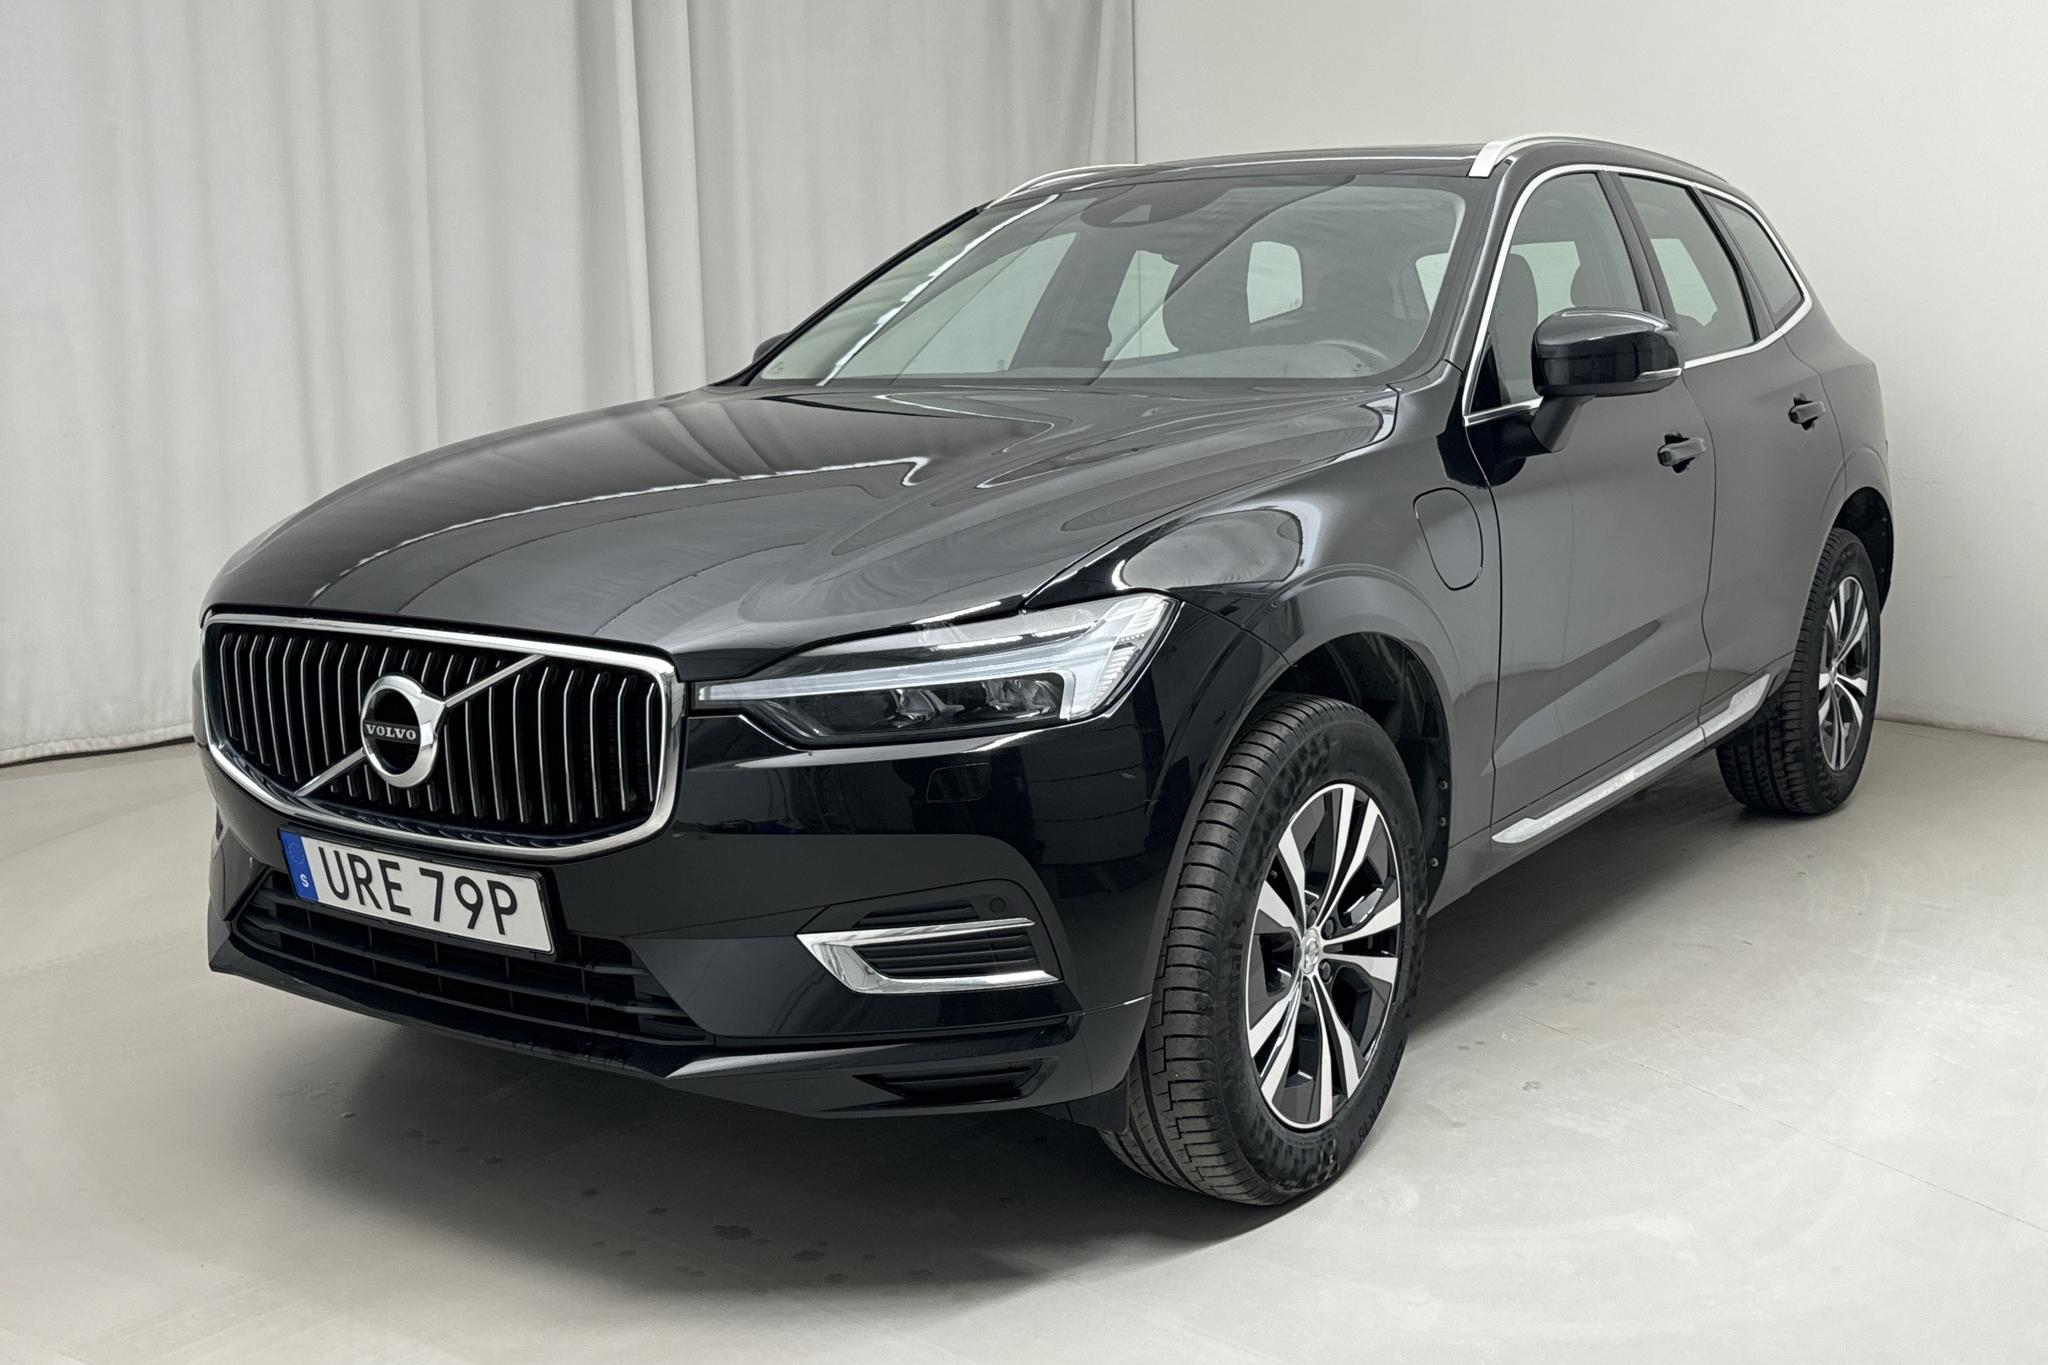 Volvo XC60 T6 AWD Recharge (340hk) - 93 240 km - Automaatne - must - 2021